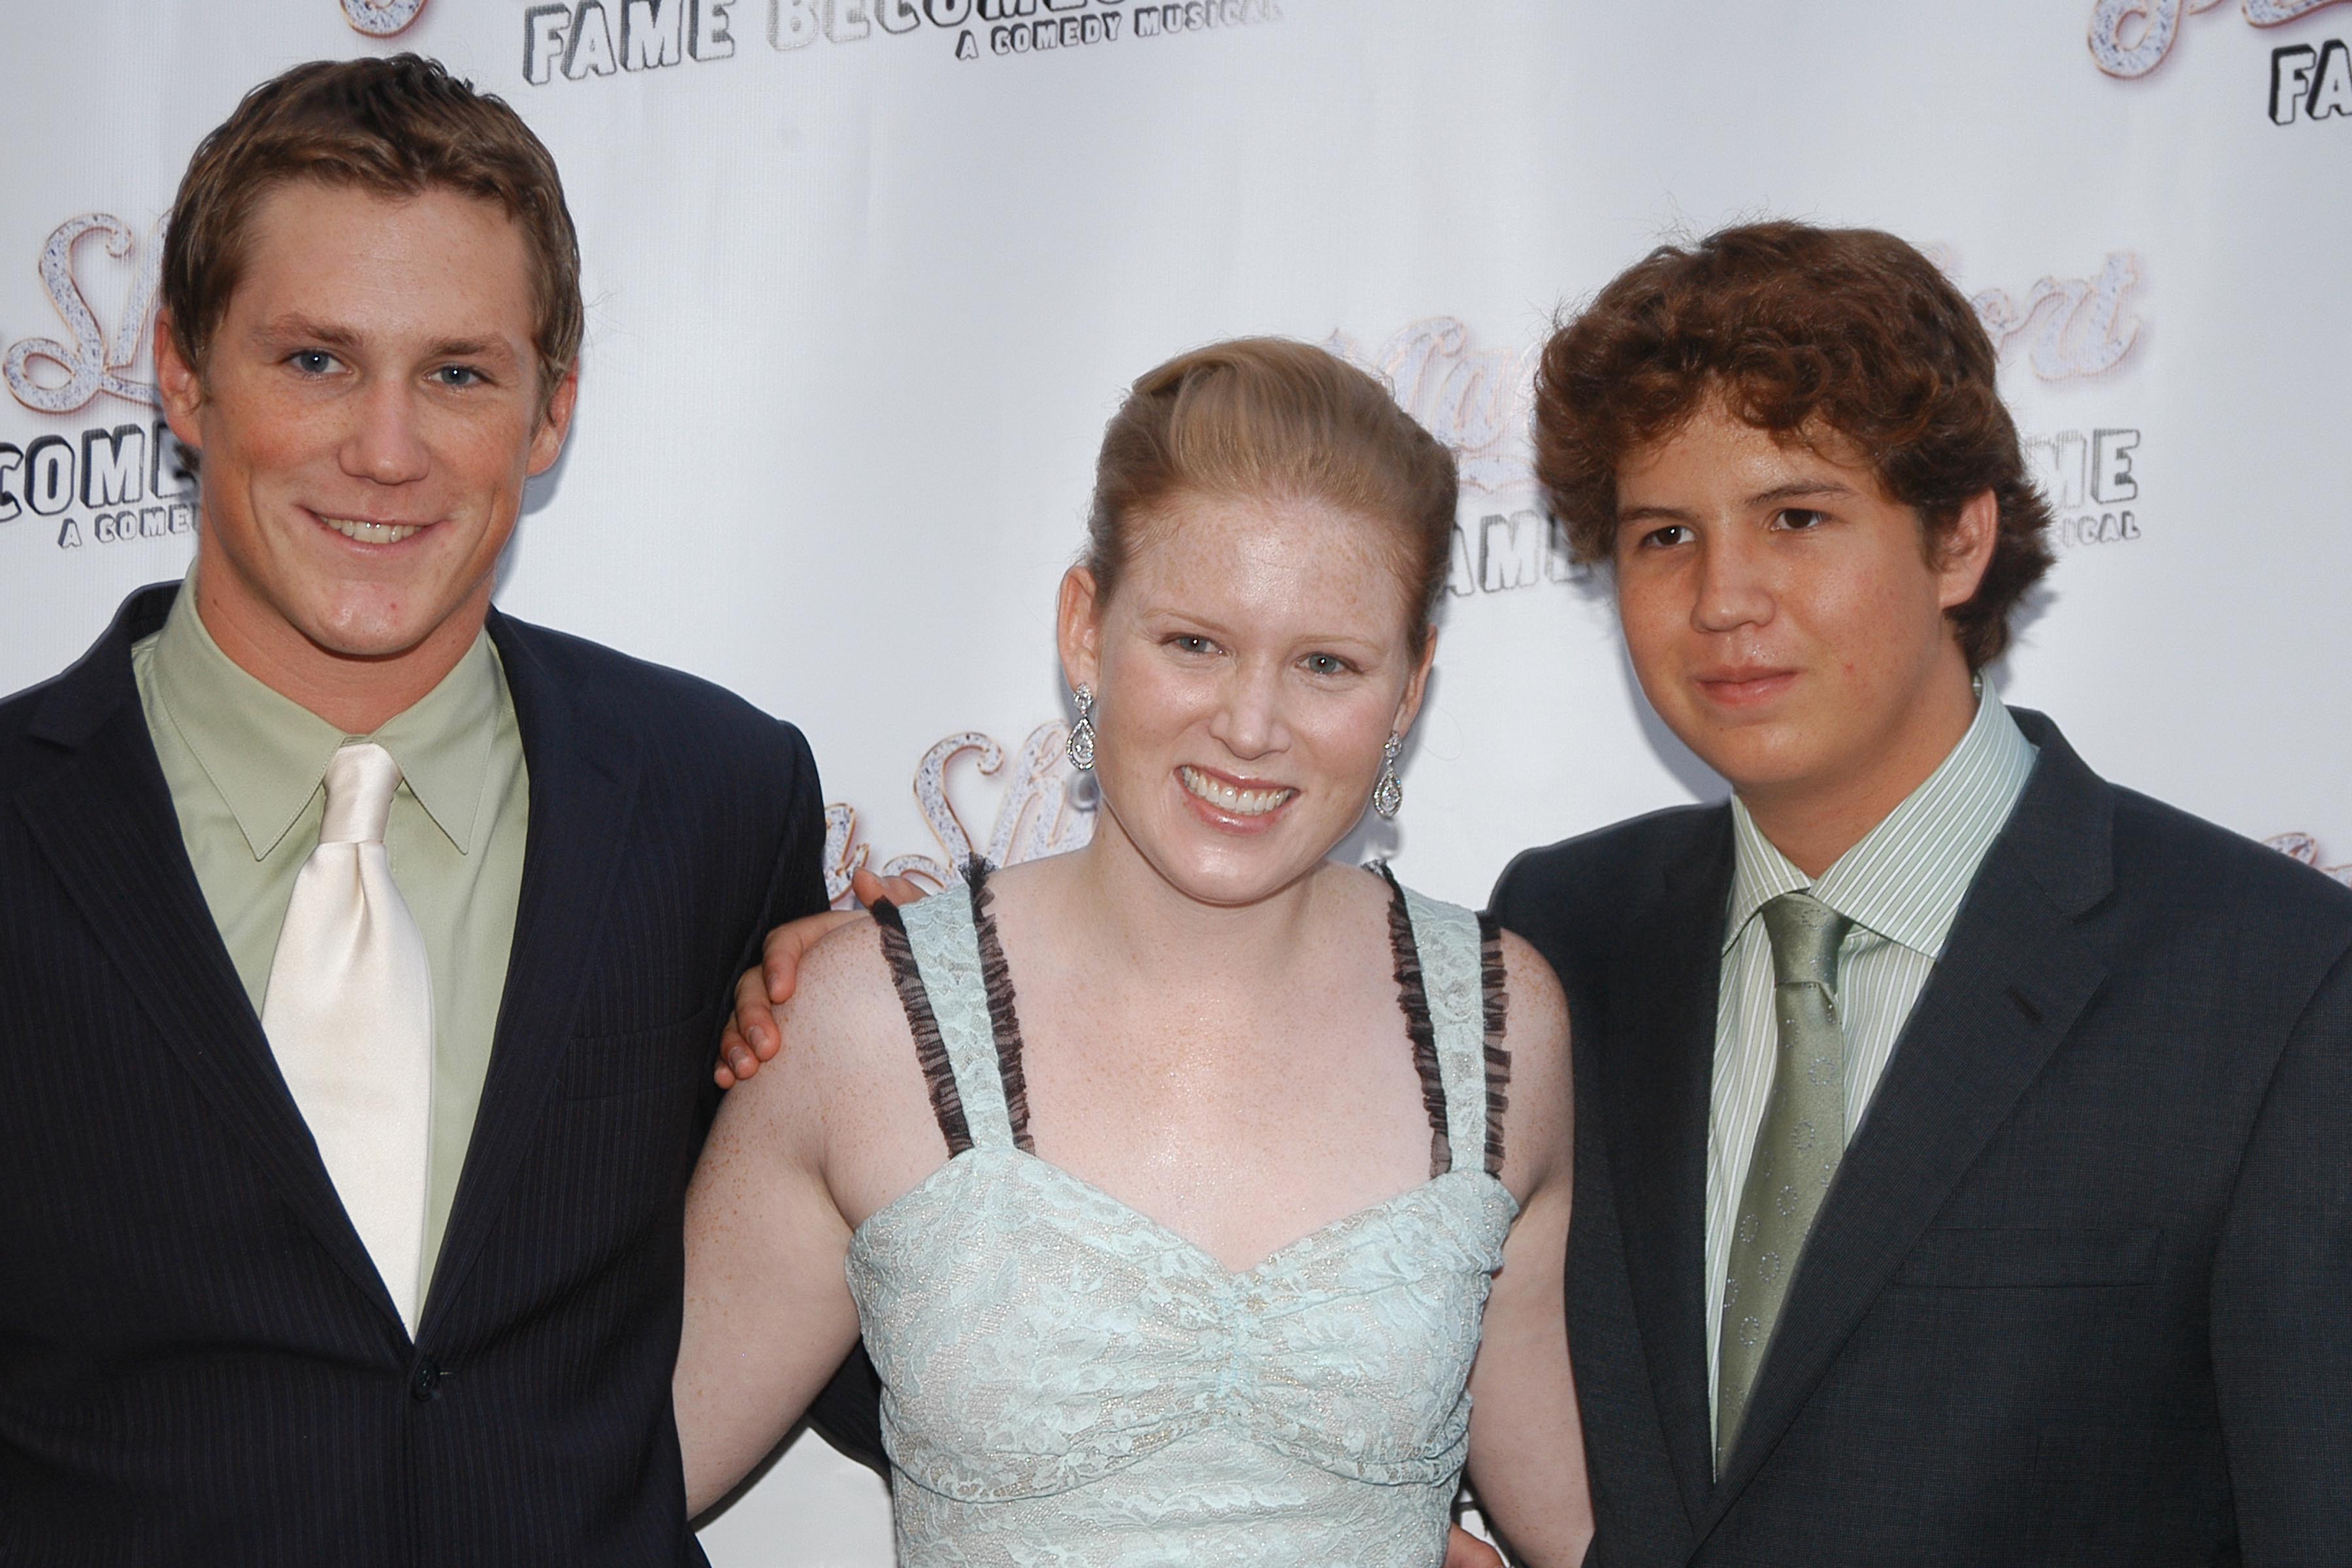 Oliver Short and his siblings Katherine Short and Henry Short attend Martin Short: FAME Becomes Me Opening Night Arrivals at Bernard B. Jacobs Theatre on August 17, 2006, in New York City. | Source: Getty Images